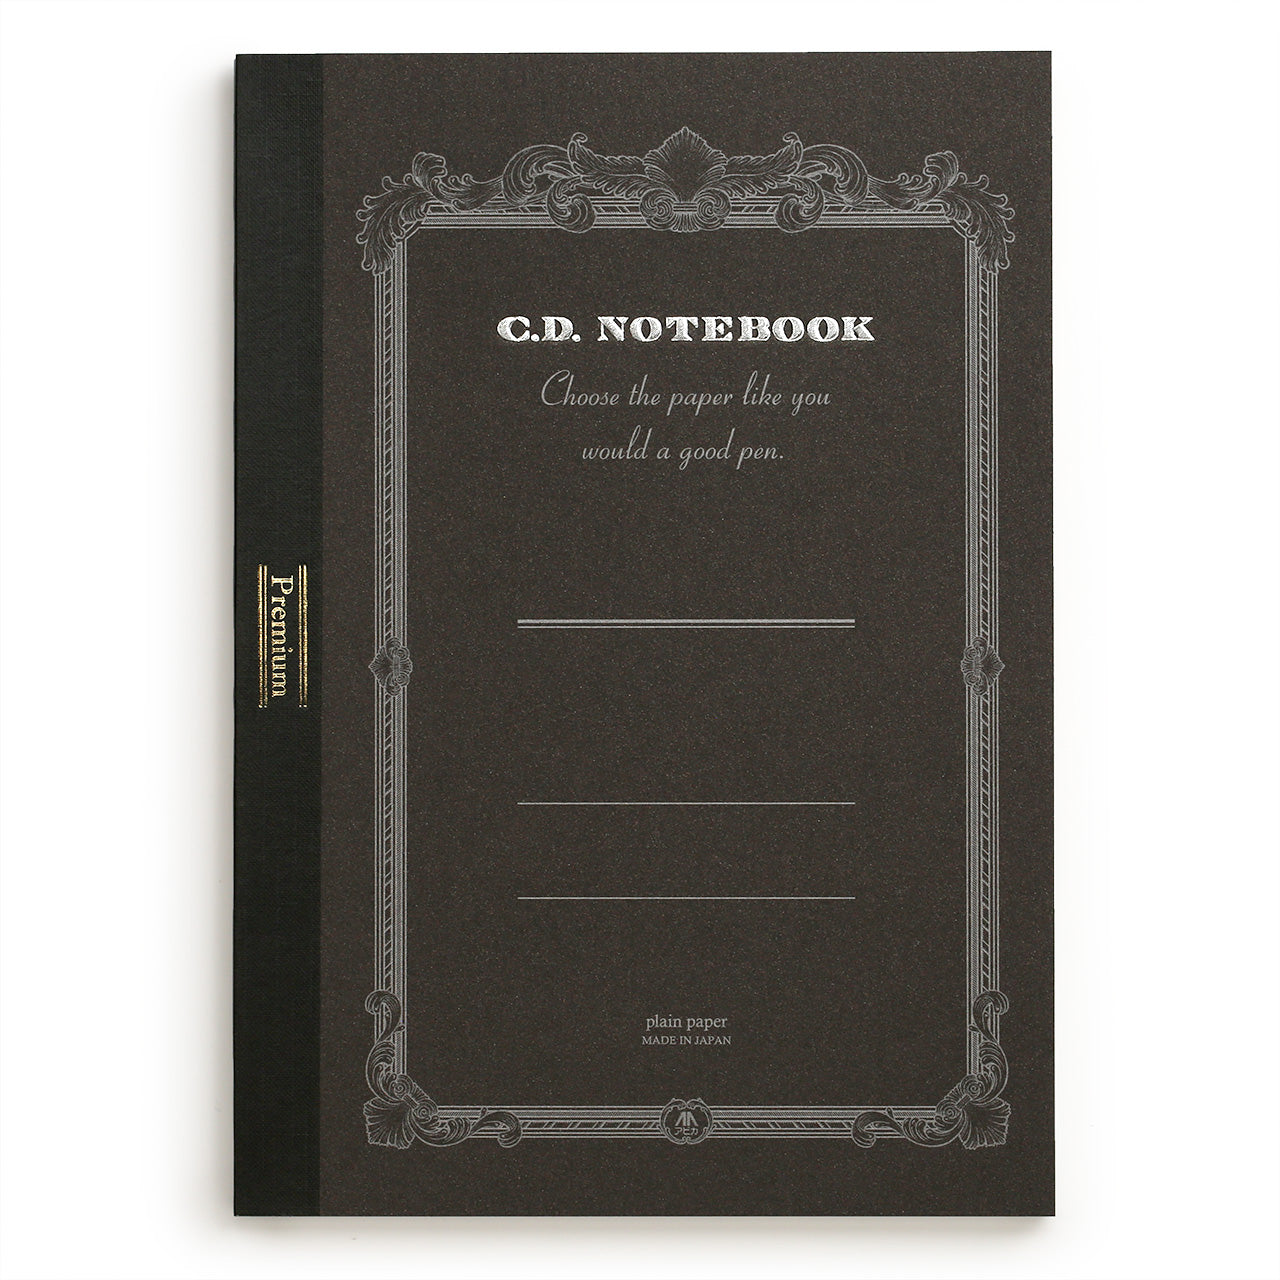 A5 lined premium notebook cover showing the dark blue shimmer